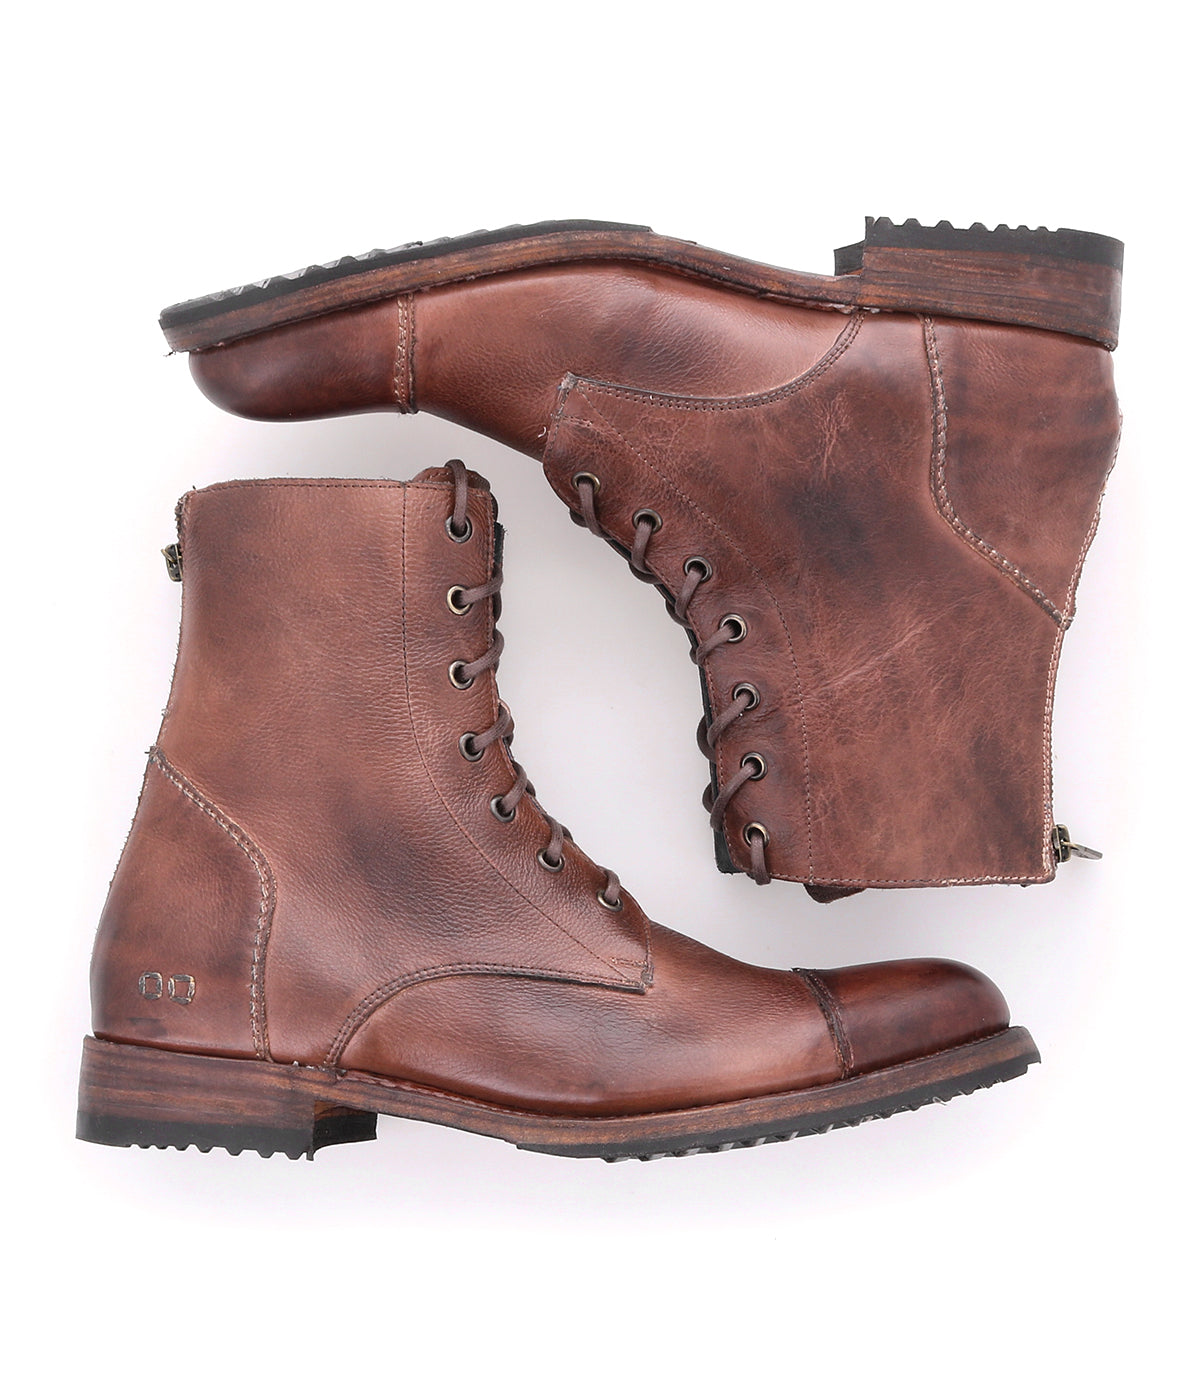 A pair of Protege brown leather boots on a white background. (Brand: Bed Stu)